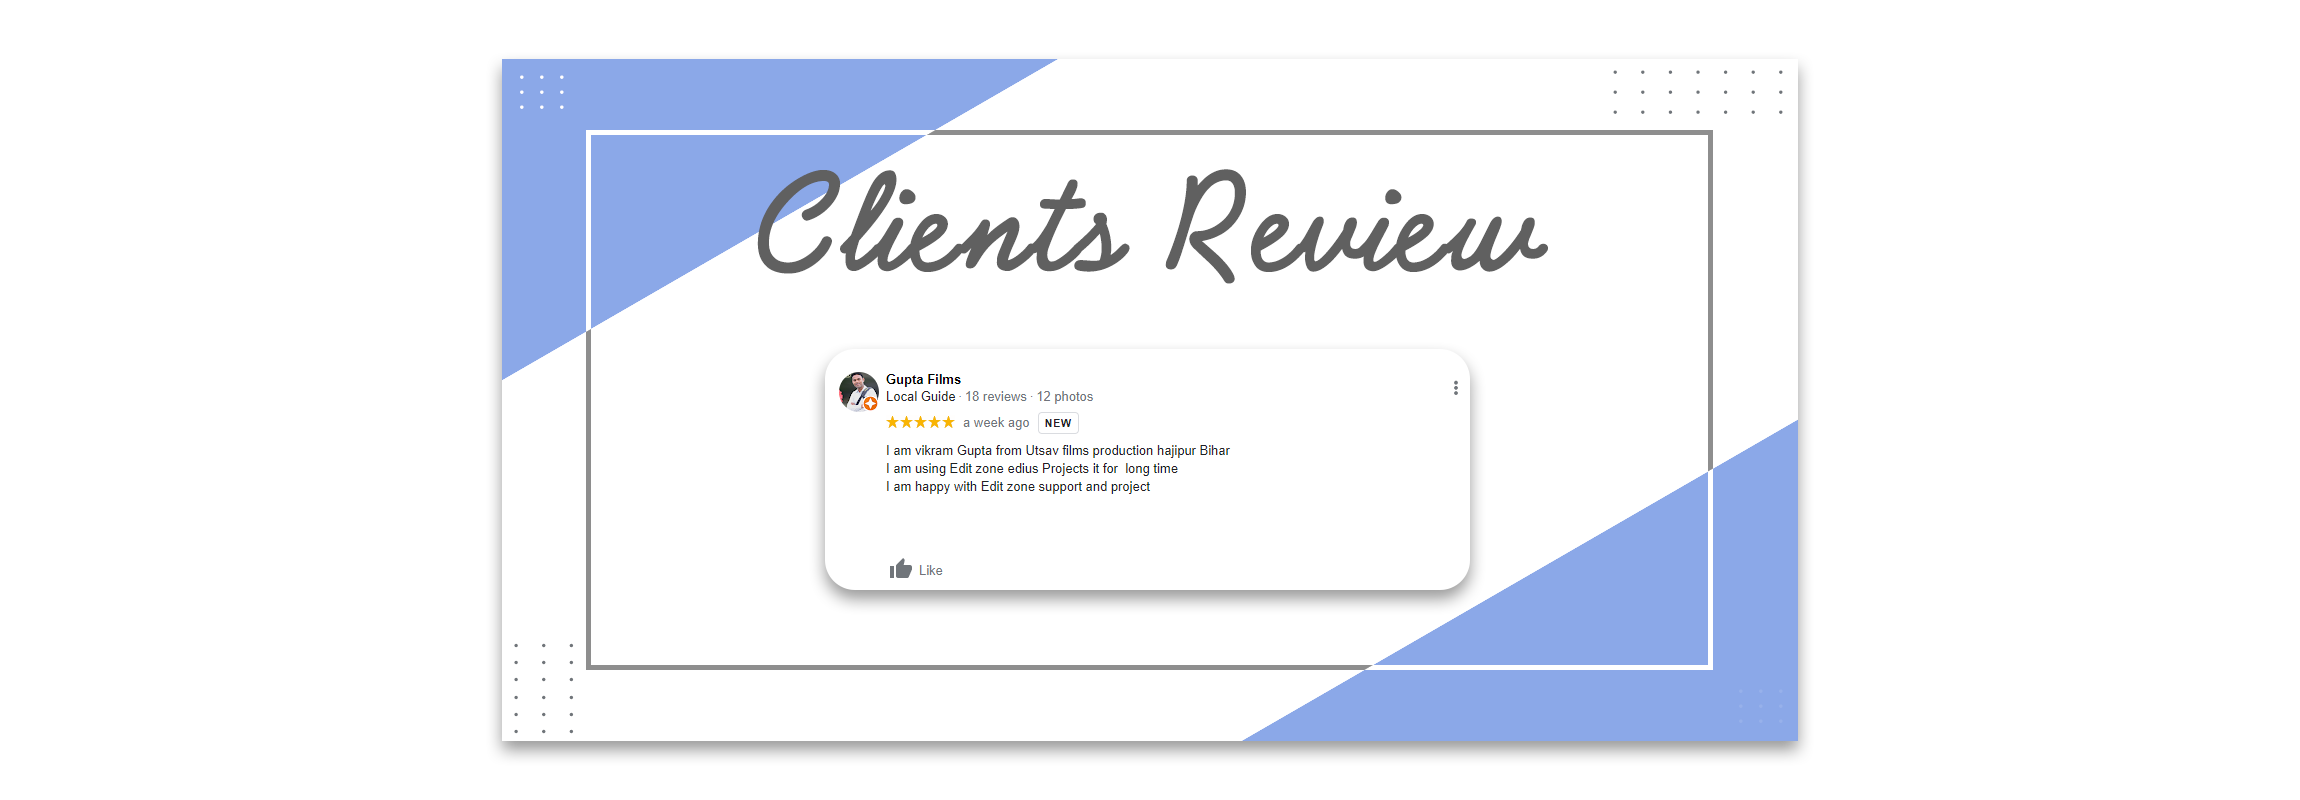 google client review img edit zone india 1 1